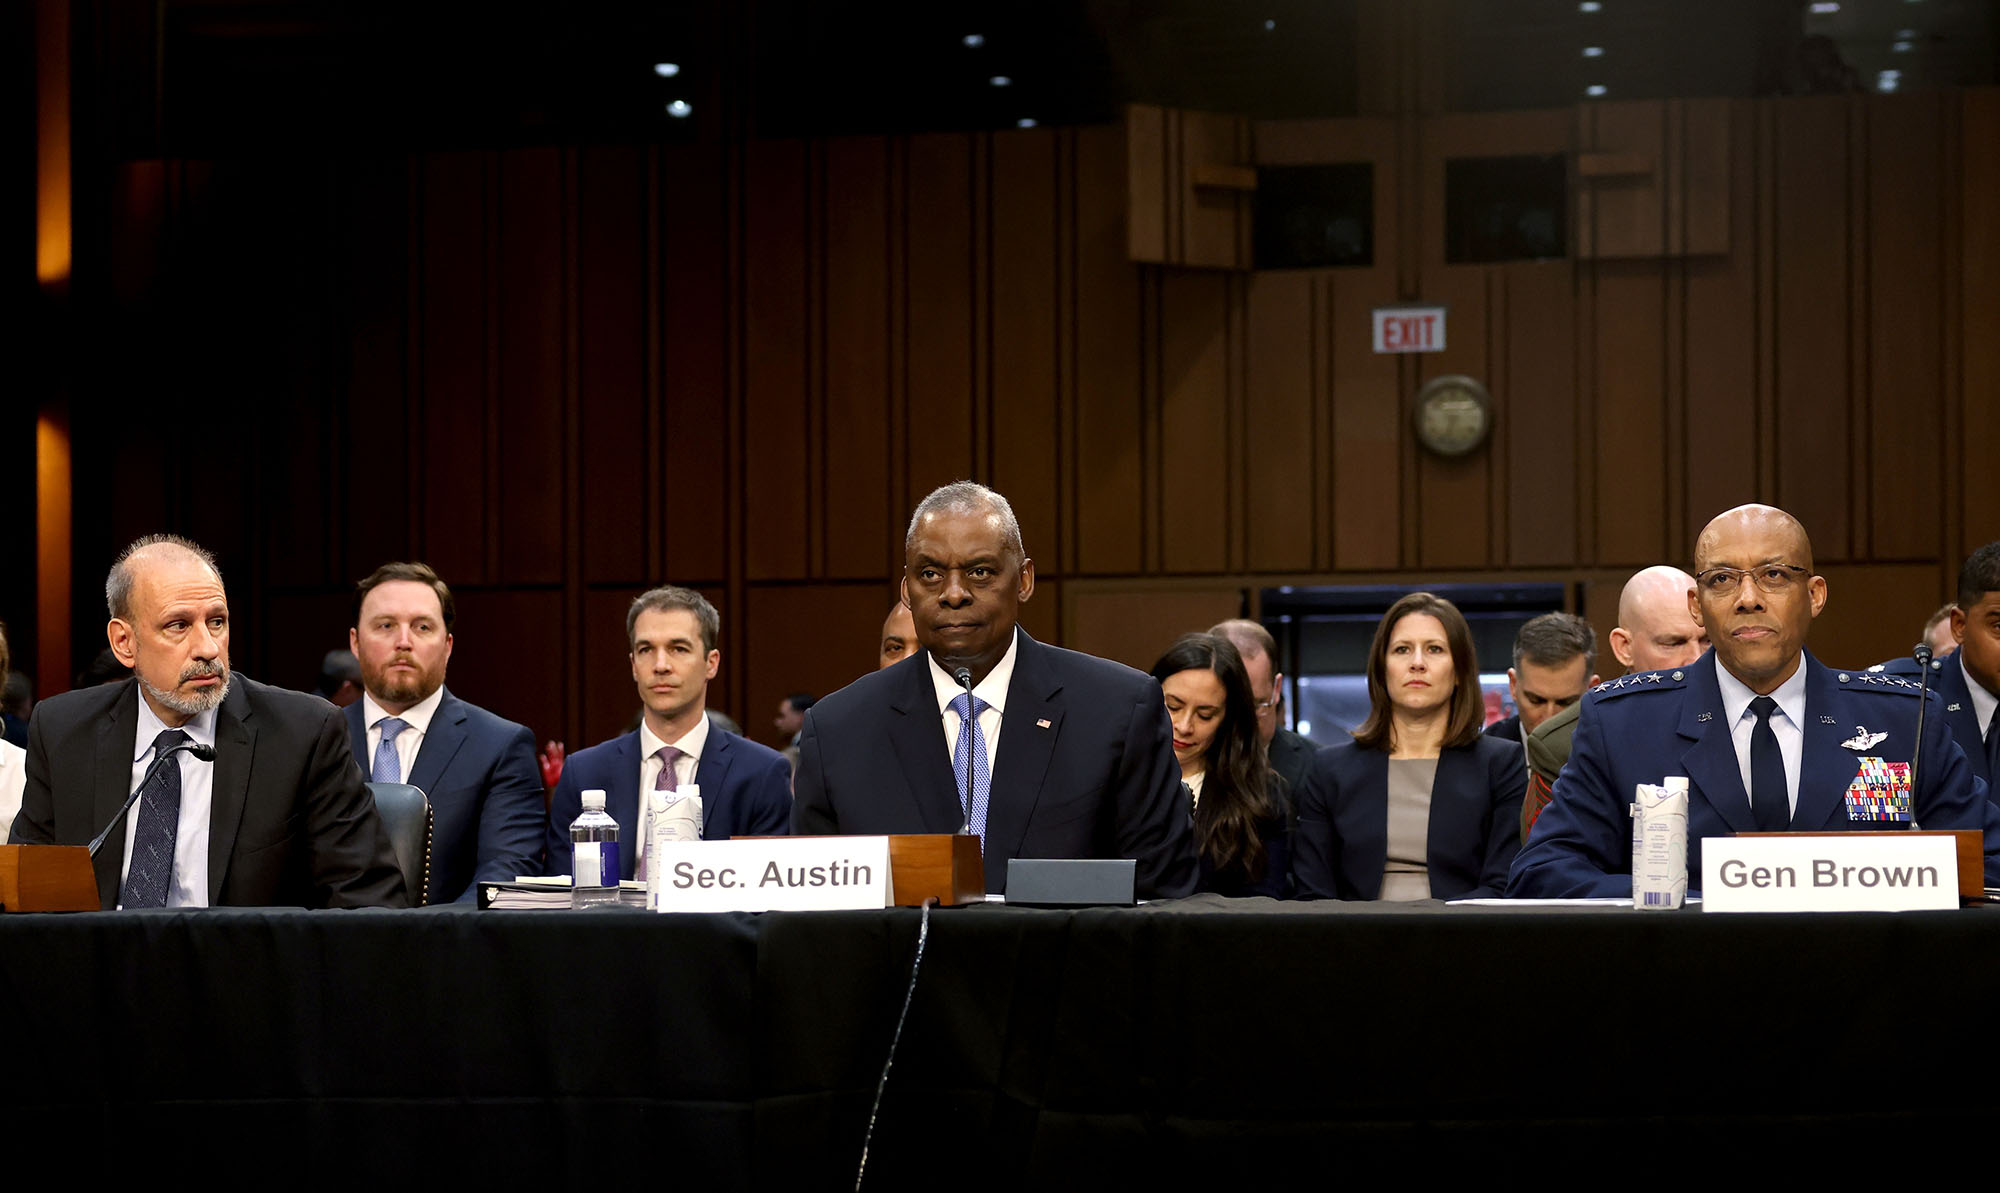 Michael McCord, comptroller of the Pentagon, from left, Lloyd Austin, US secretary of defense, center, and Charles Q. Brown Jr., chairman of the Joint Chiefs of Staff, attend a Senate Armed Services Committee hearing in Washington, D.C., on April 9.